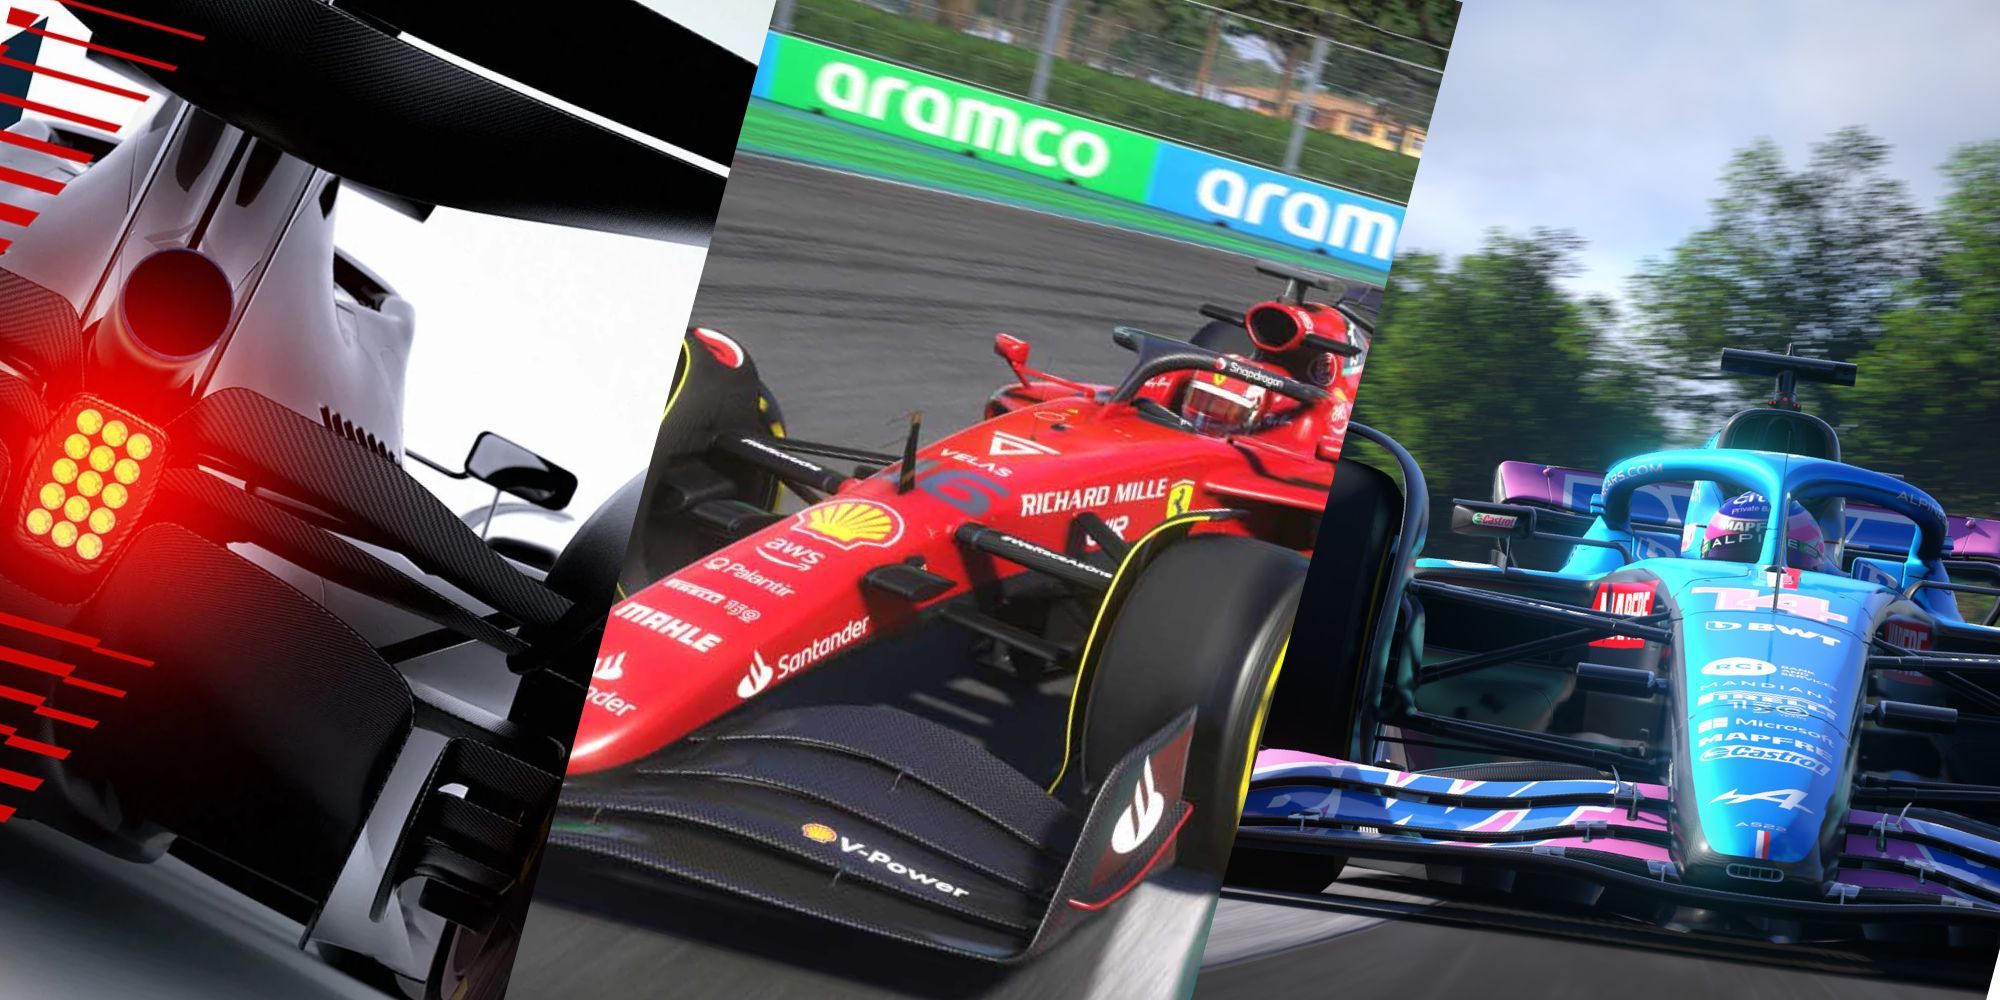 3 Formula 1 cars from the F1 22 Video Game